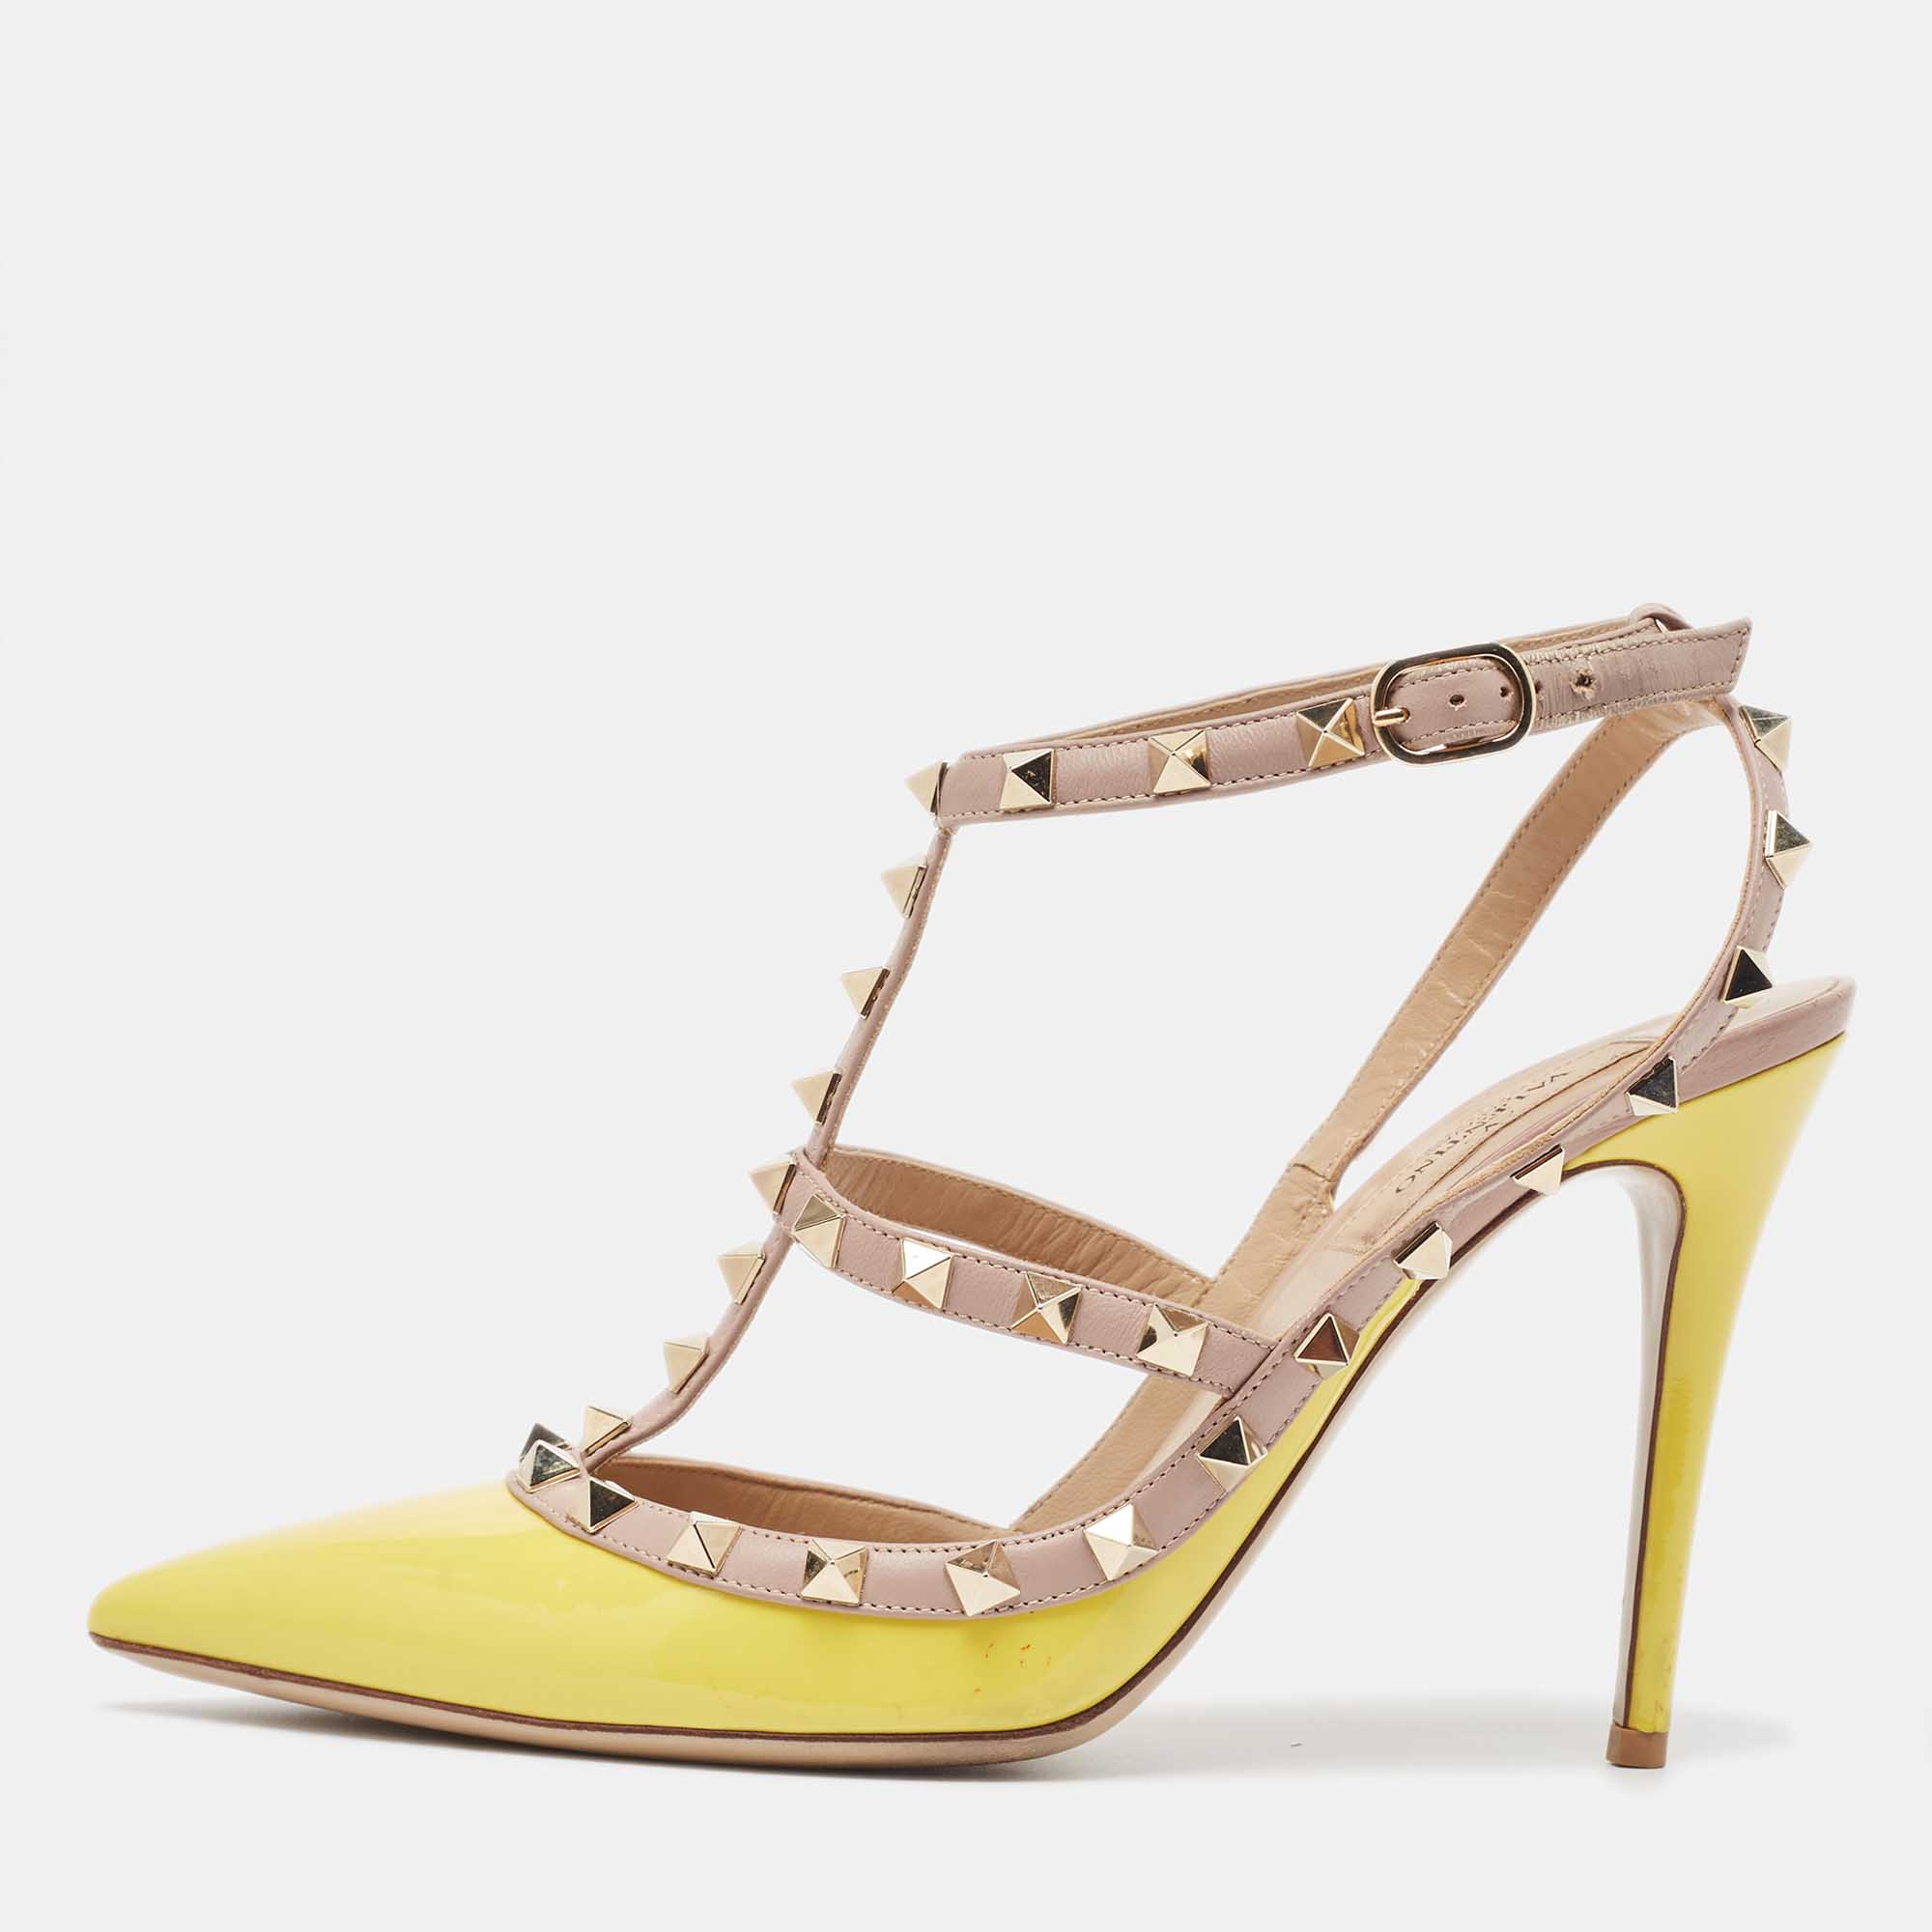 Valentino yellow/pink leather rockstud ankle strap pumps size 39.5